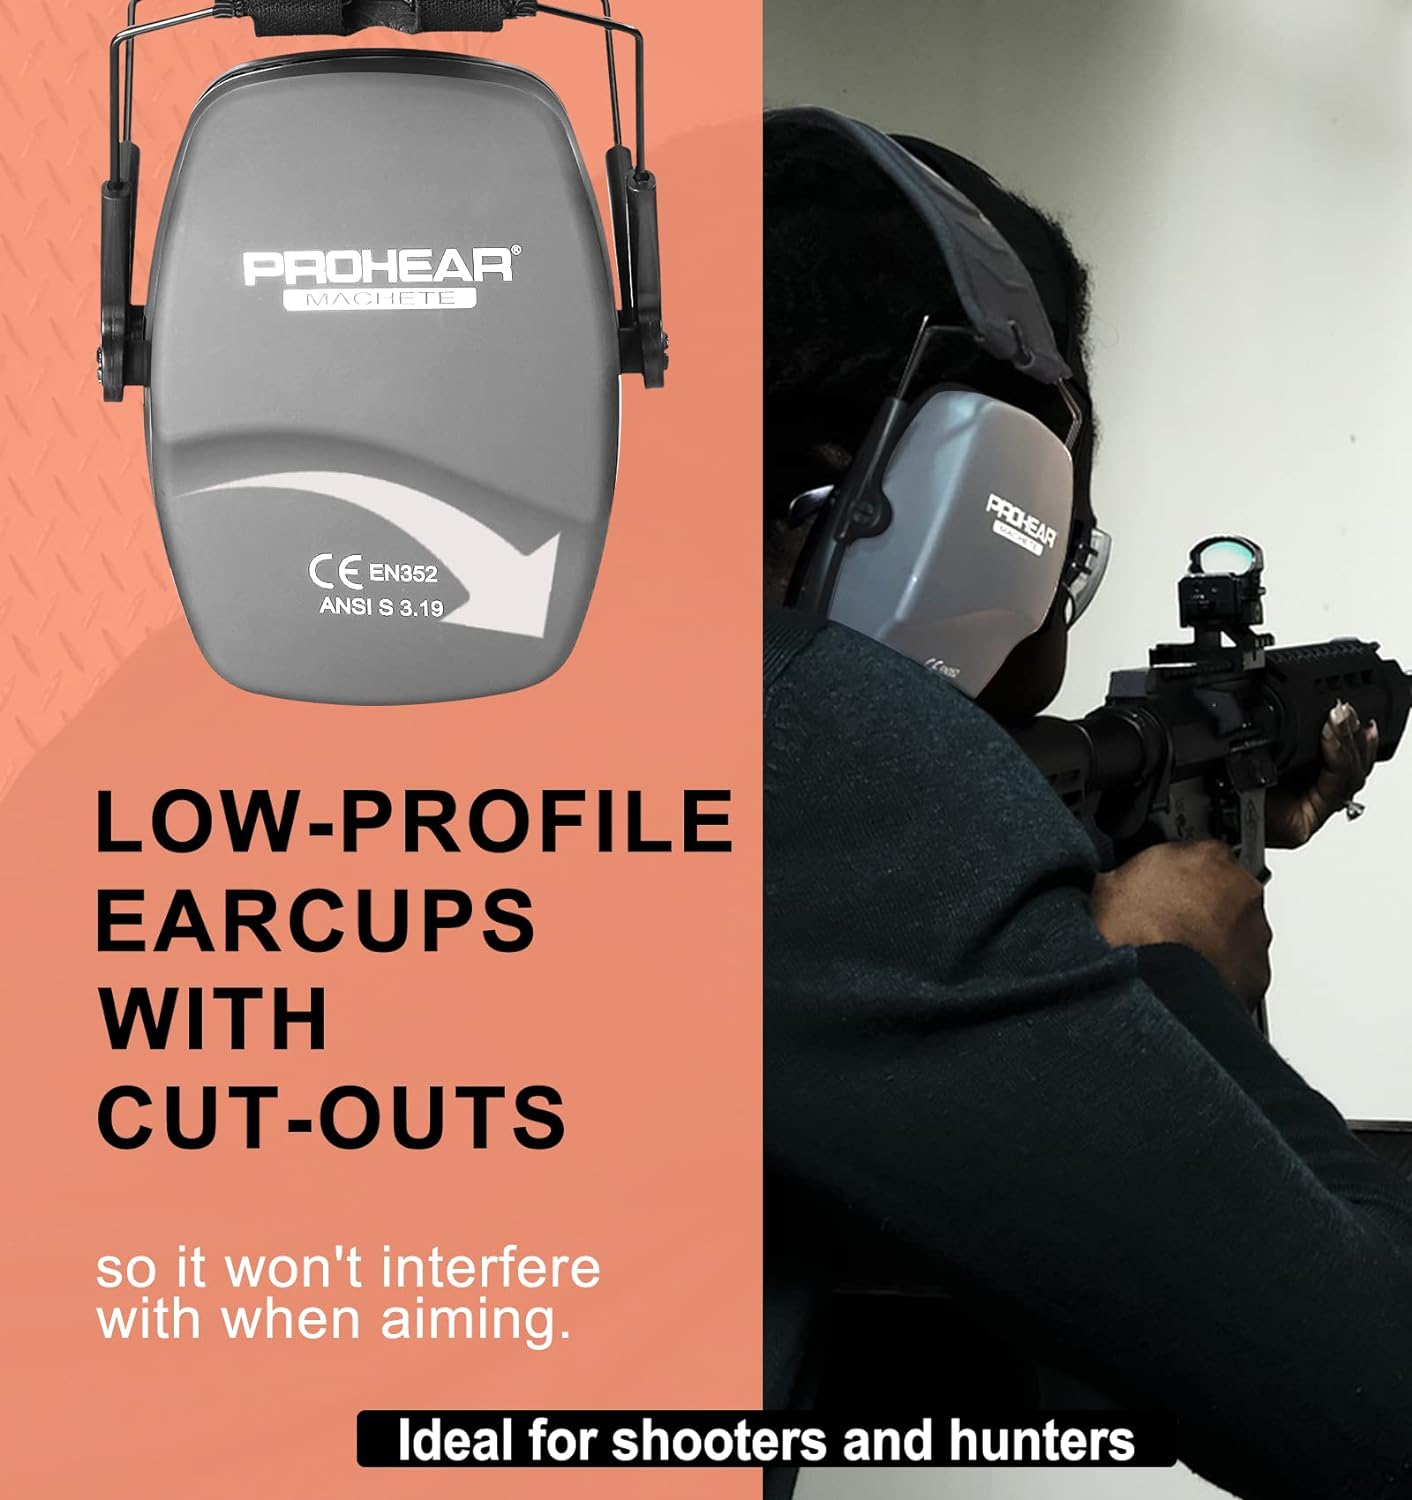 PROHEAR 016 Ear Protection Safety Earmuffs for Shooting, NRR 26dB Noise Reduction Slim Passive Hearing Protector with Low-Profile Earcups, Compact Foldable Ear Defenders for Gun Range, Hunting,Grey